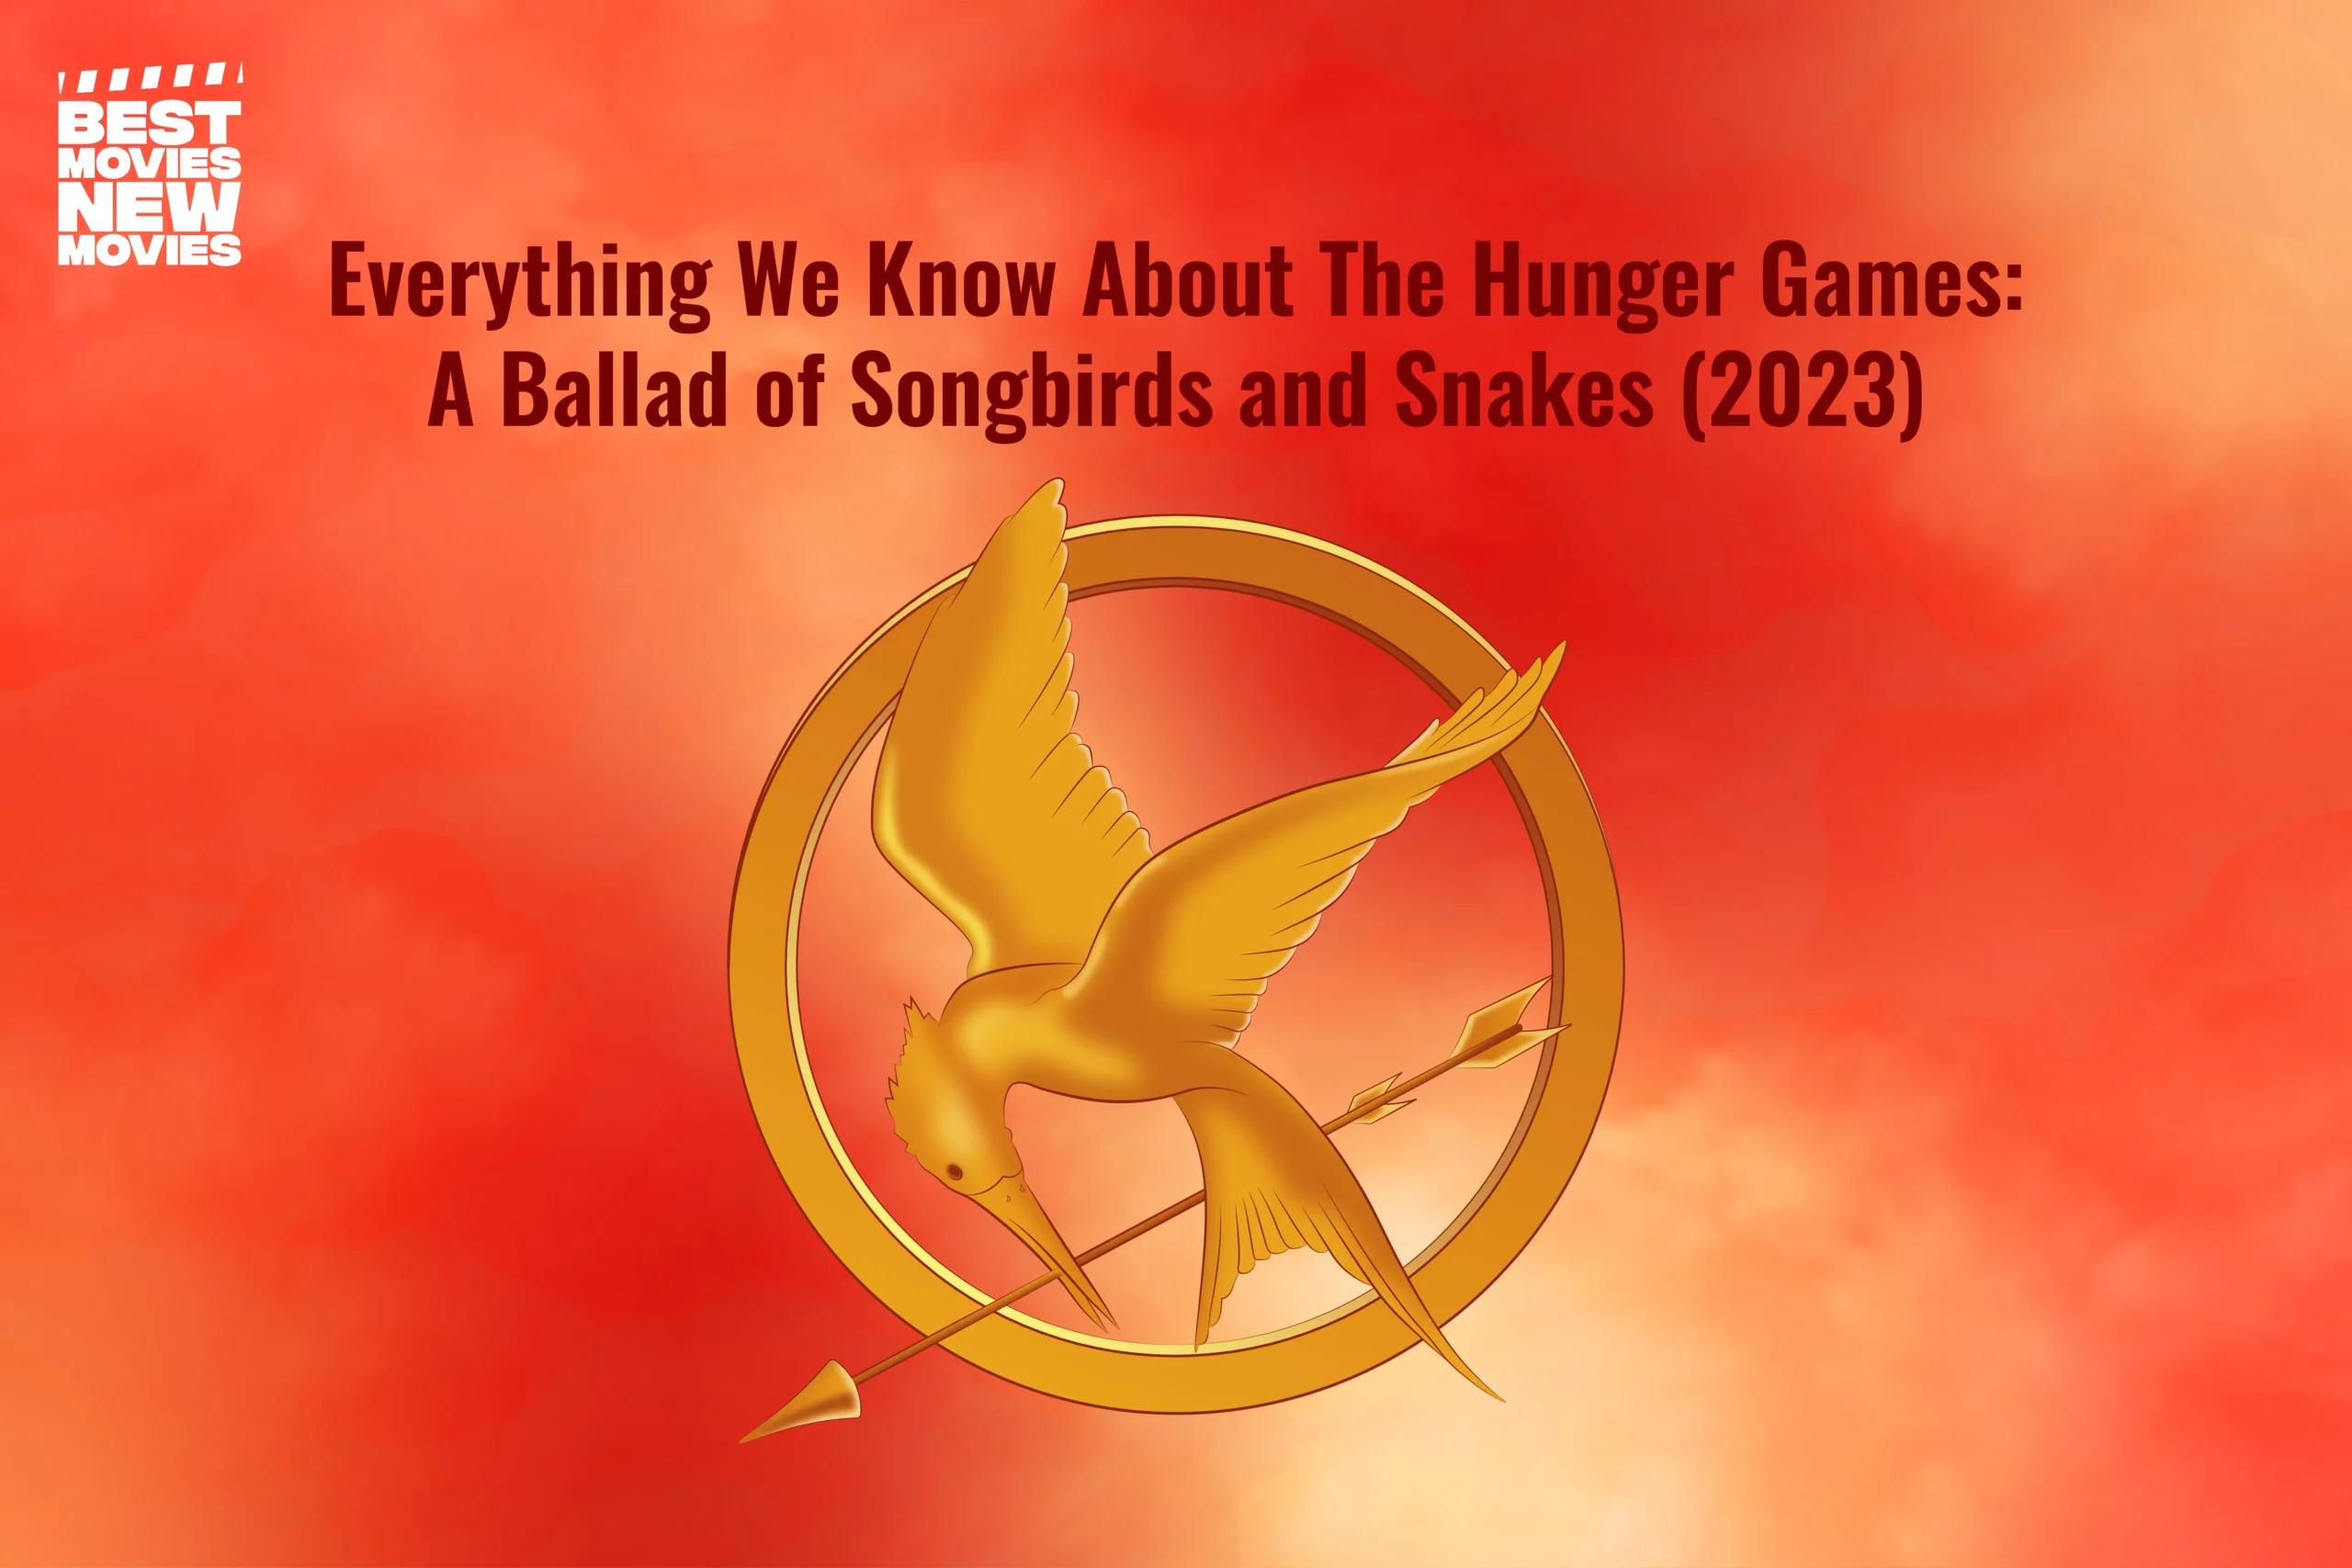 The Hunger Games A Ballad of Songbirds and Snakes (2023)